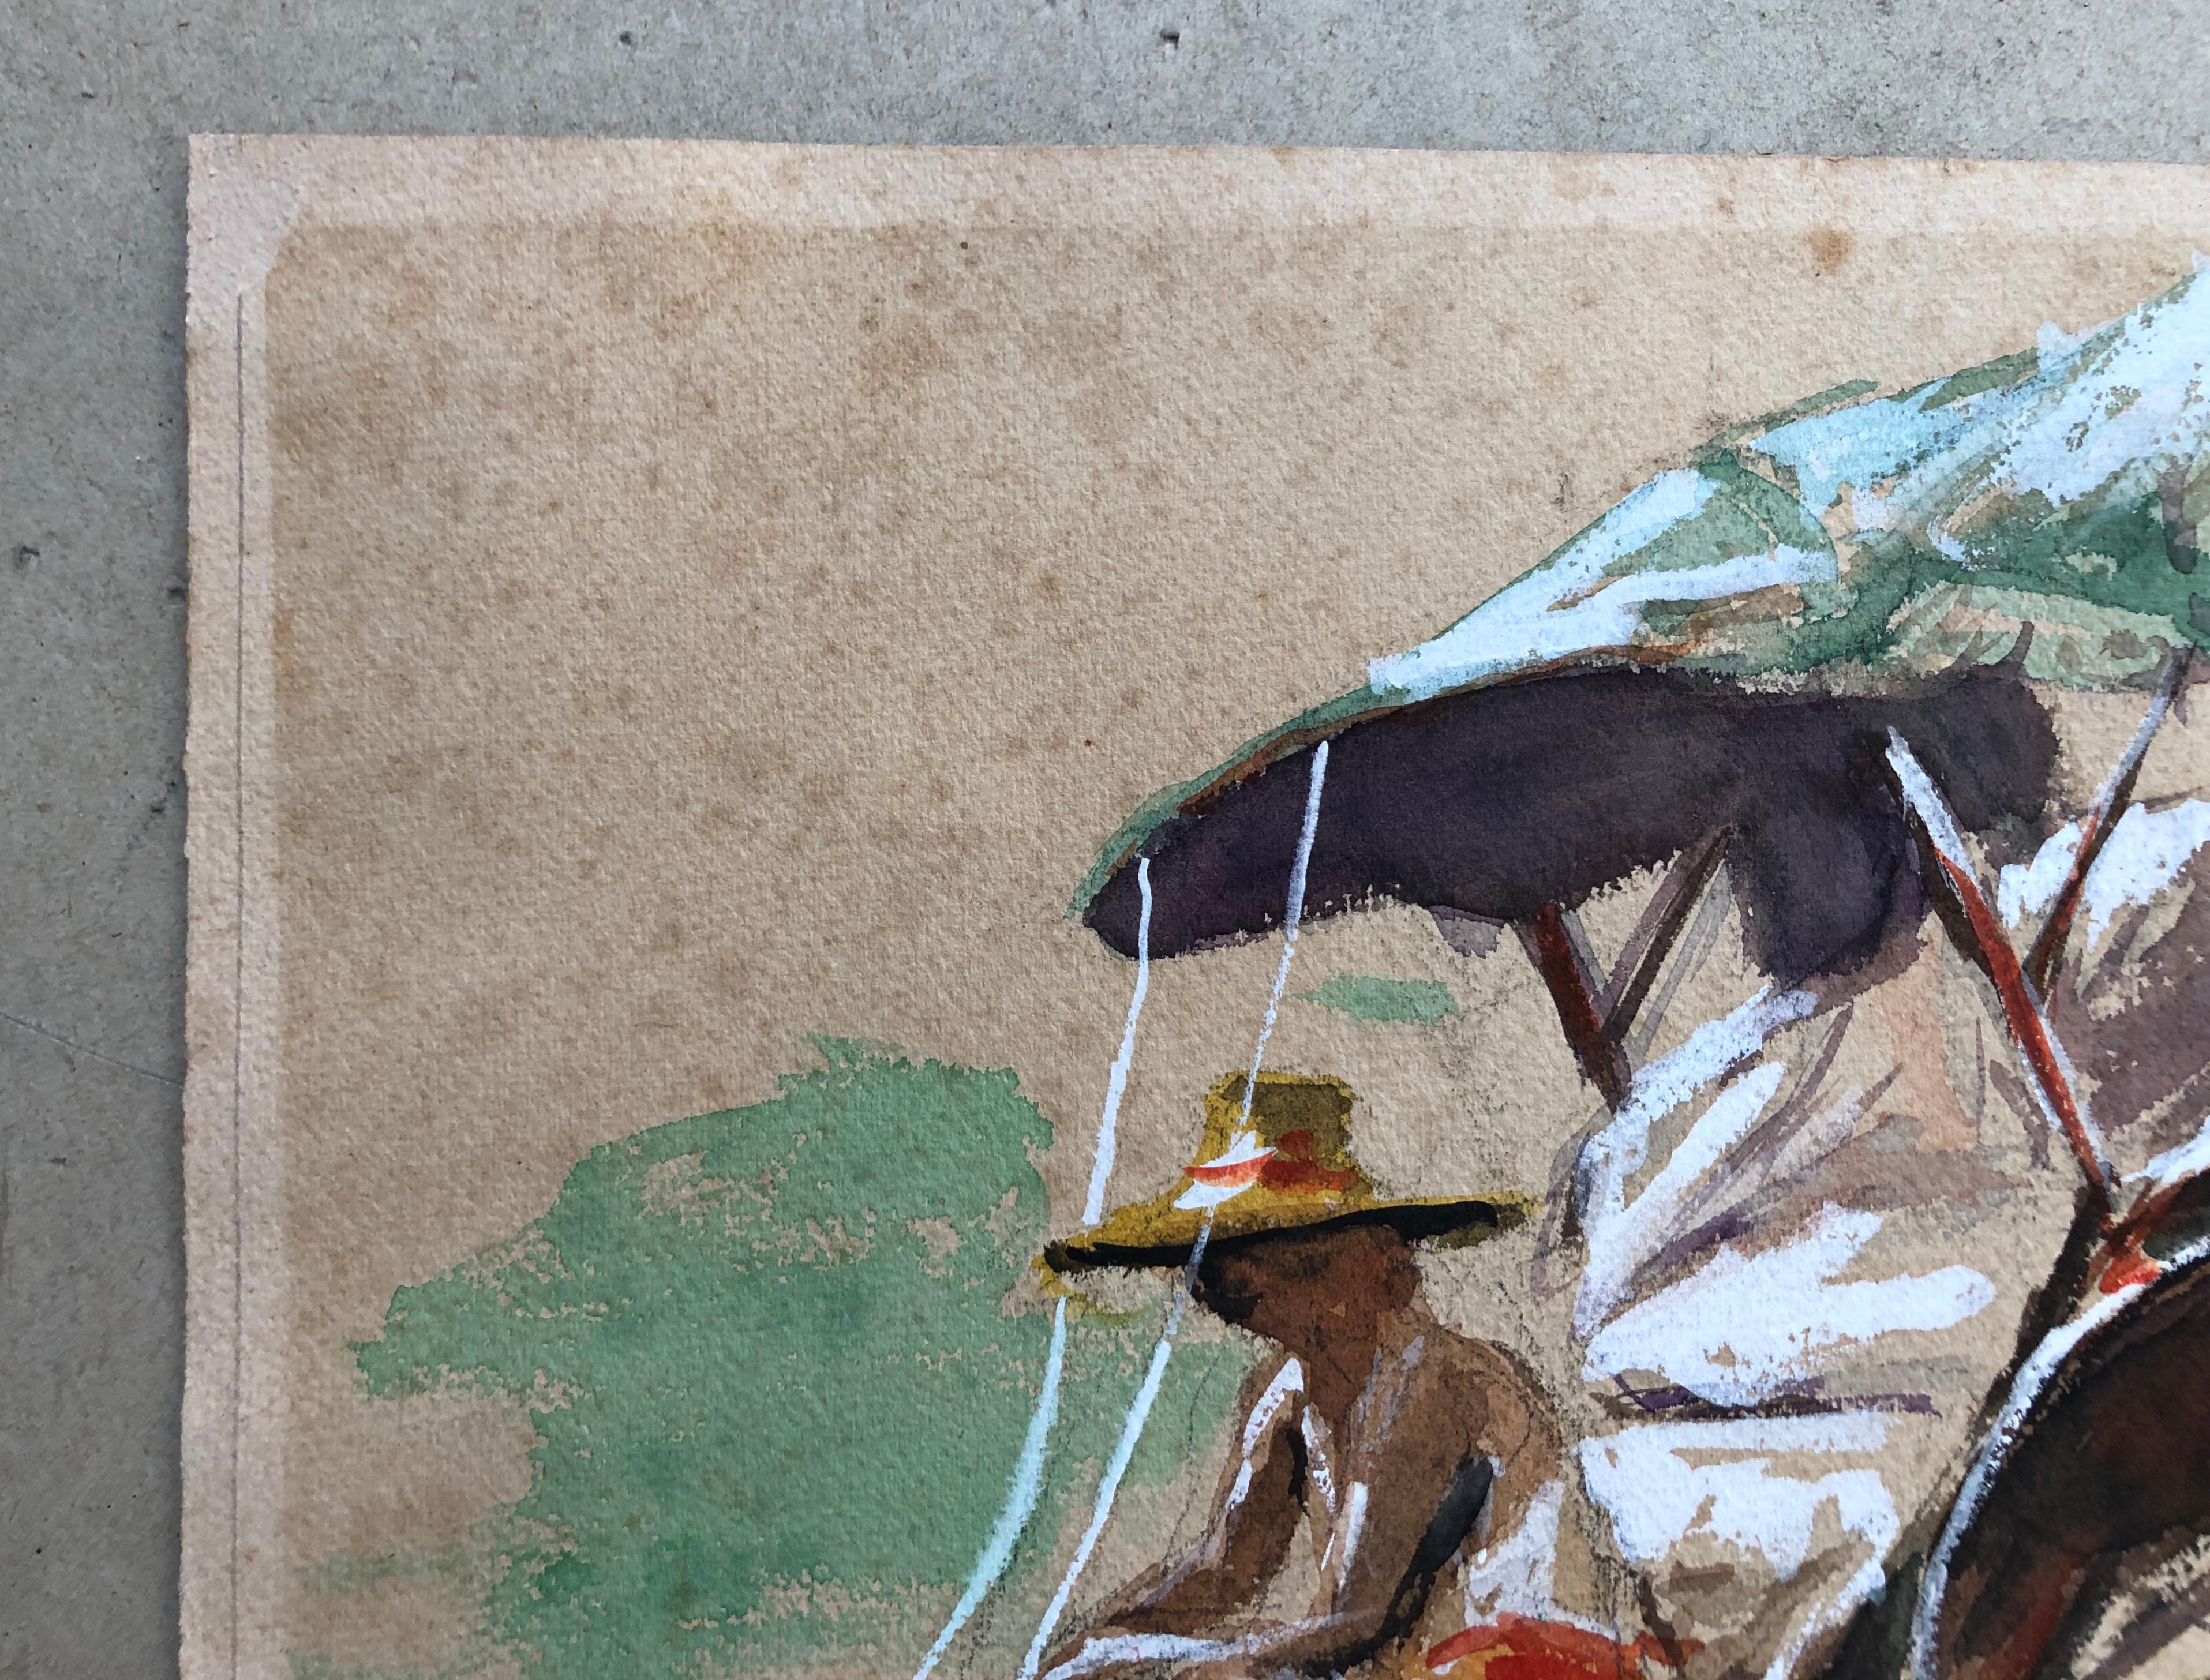 Rickshaw study.
Gouache watercolor.
Signature to be identified.
Dated 1917.
Faded paper and small foxing.
28.5 x 32.5 cm